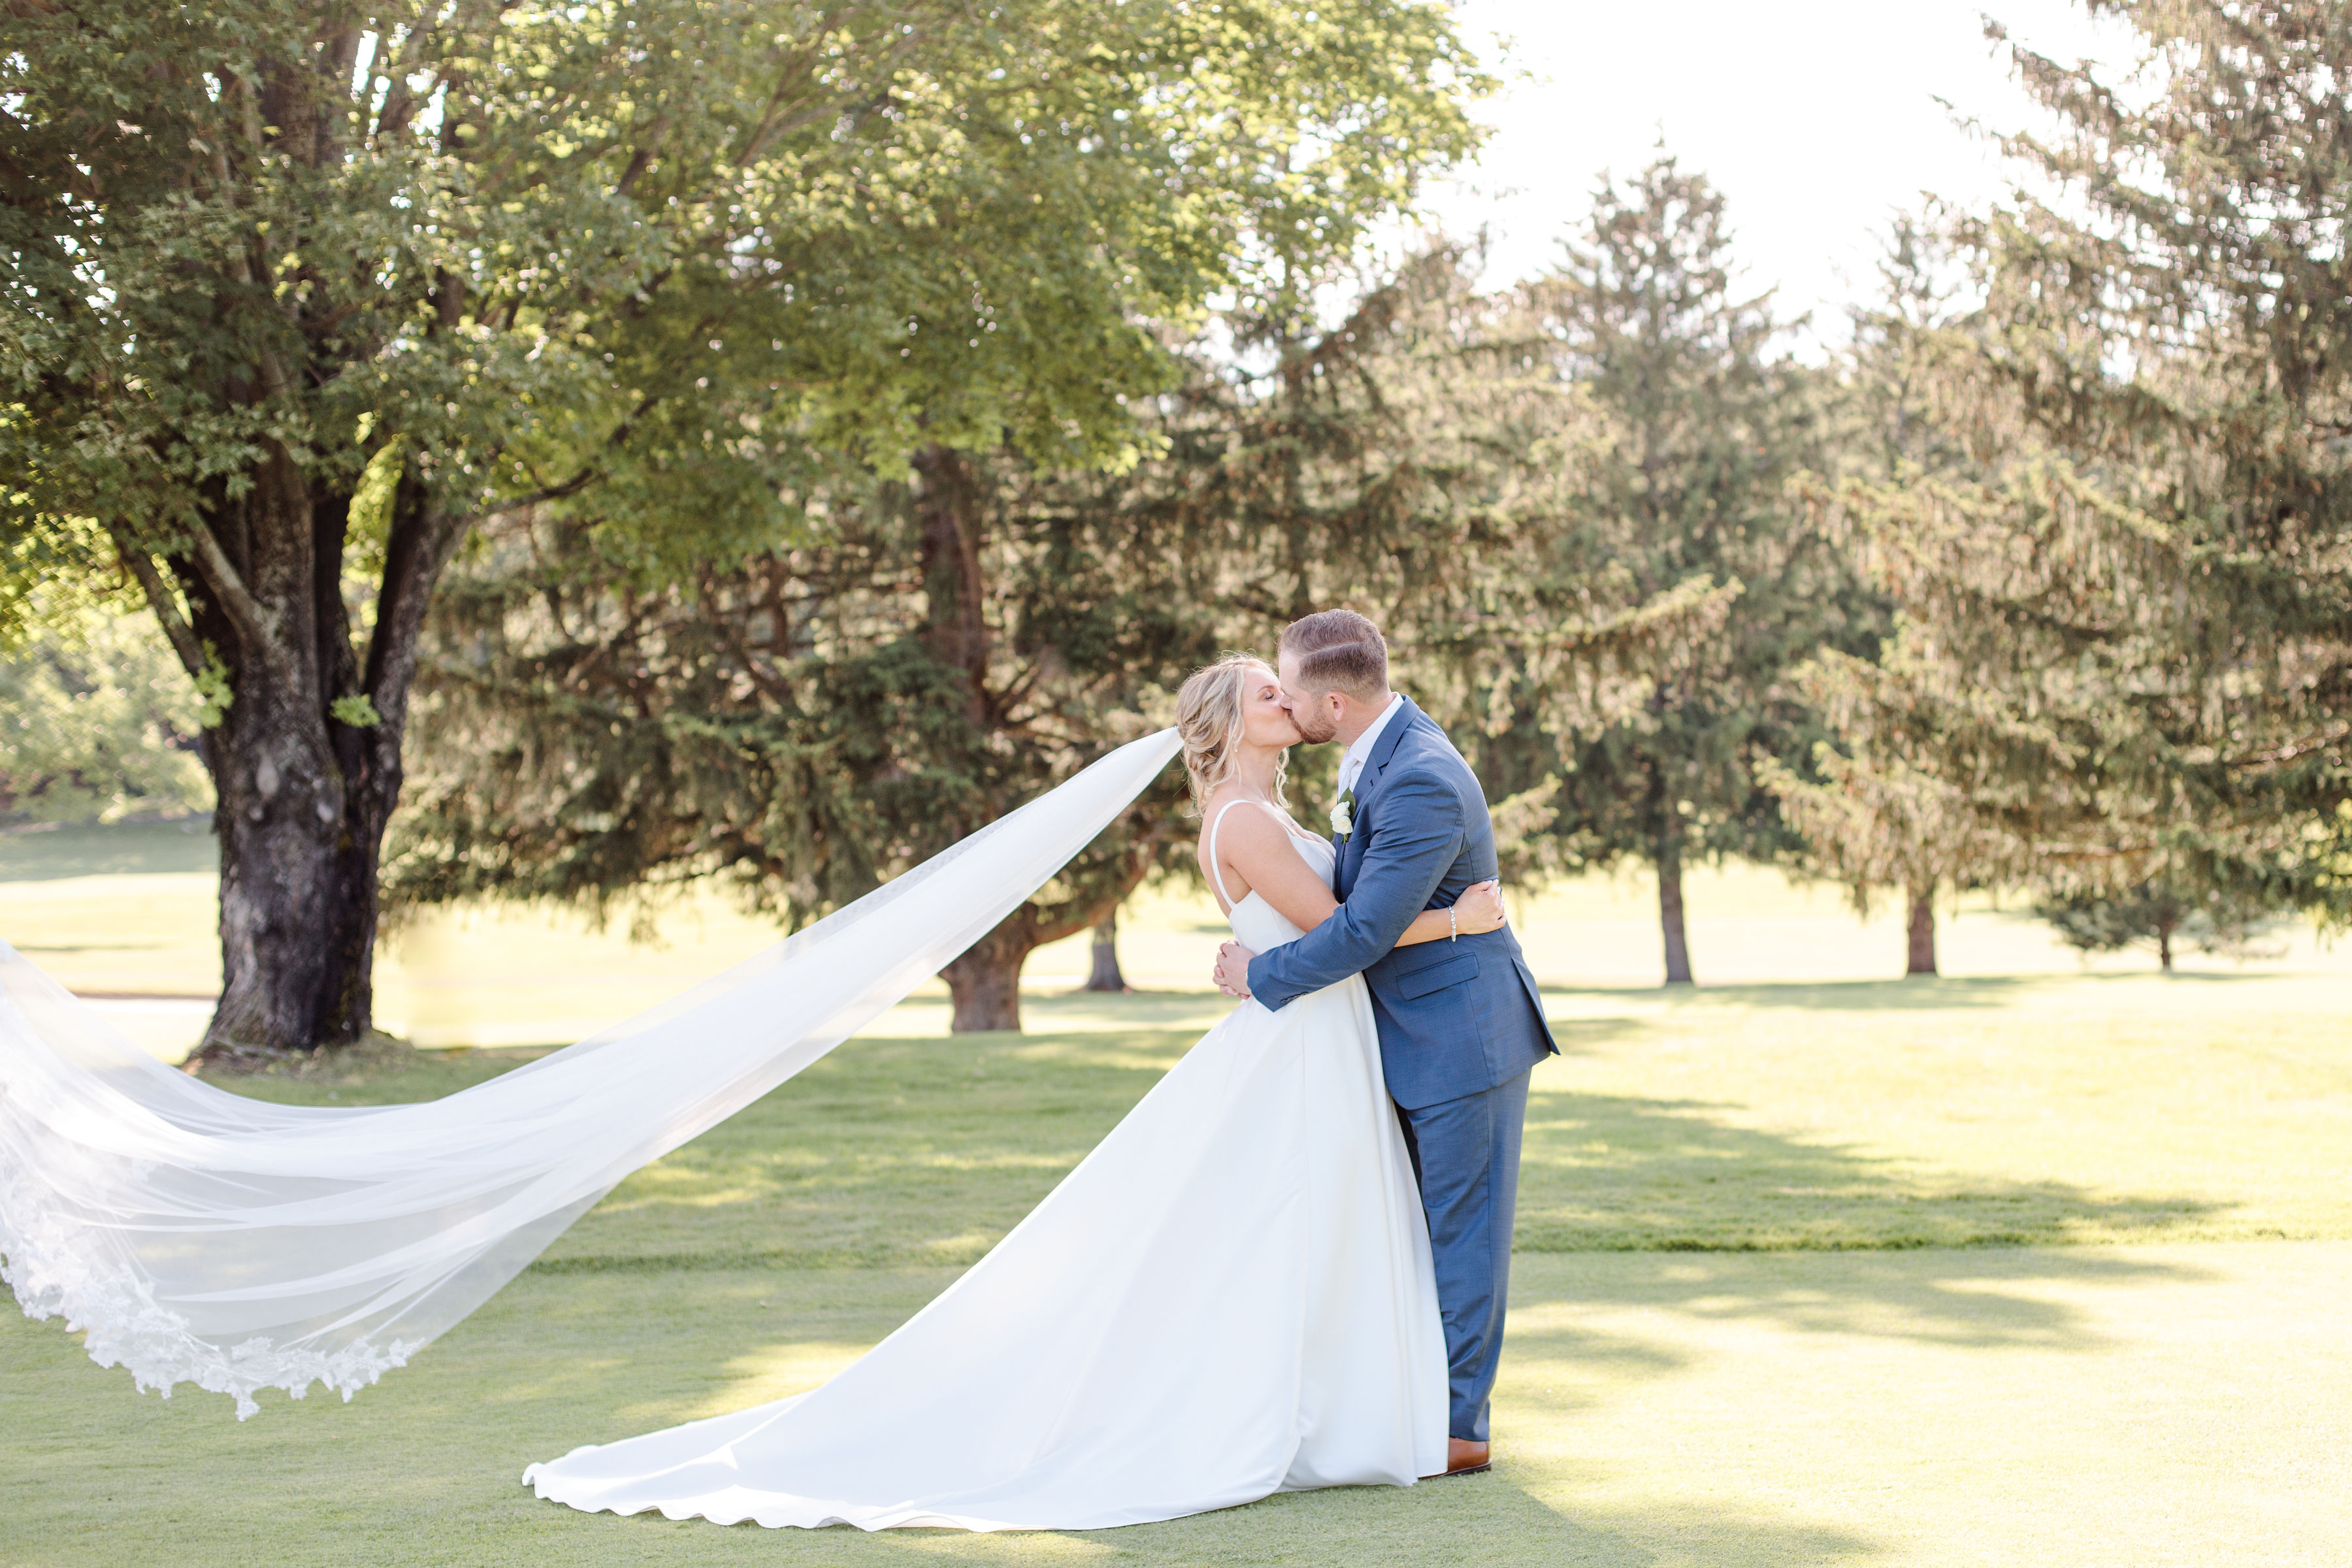 Passionate wedding kiss outdoors with serene landscape